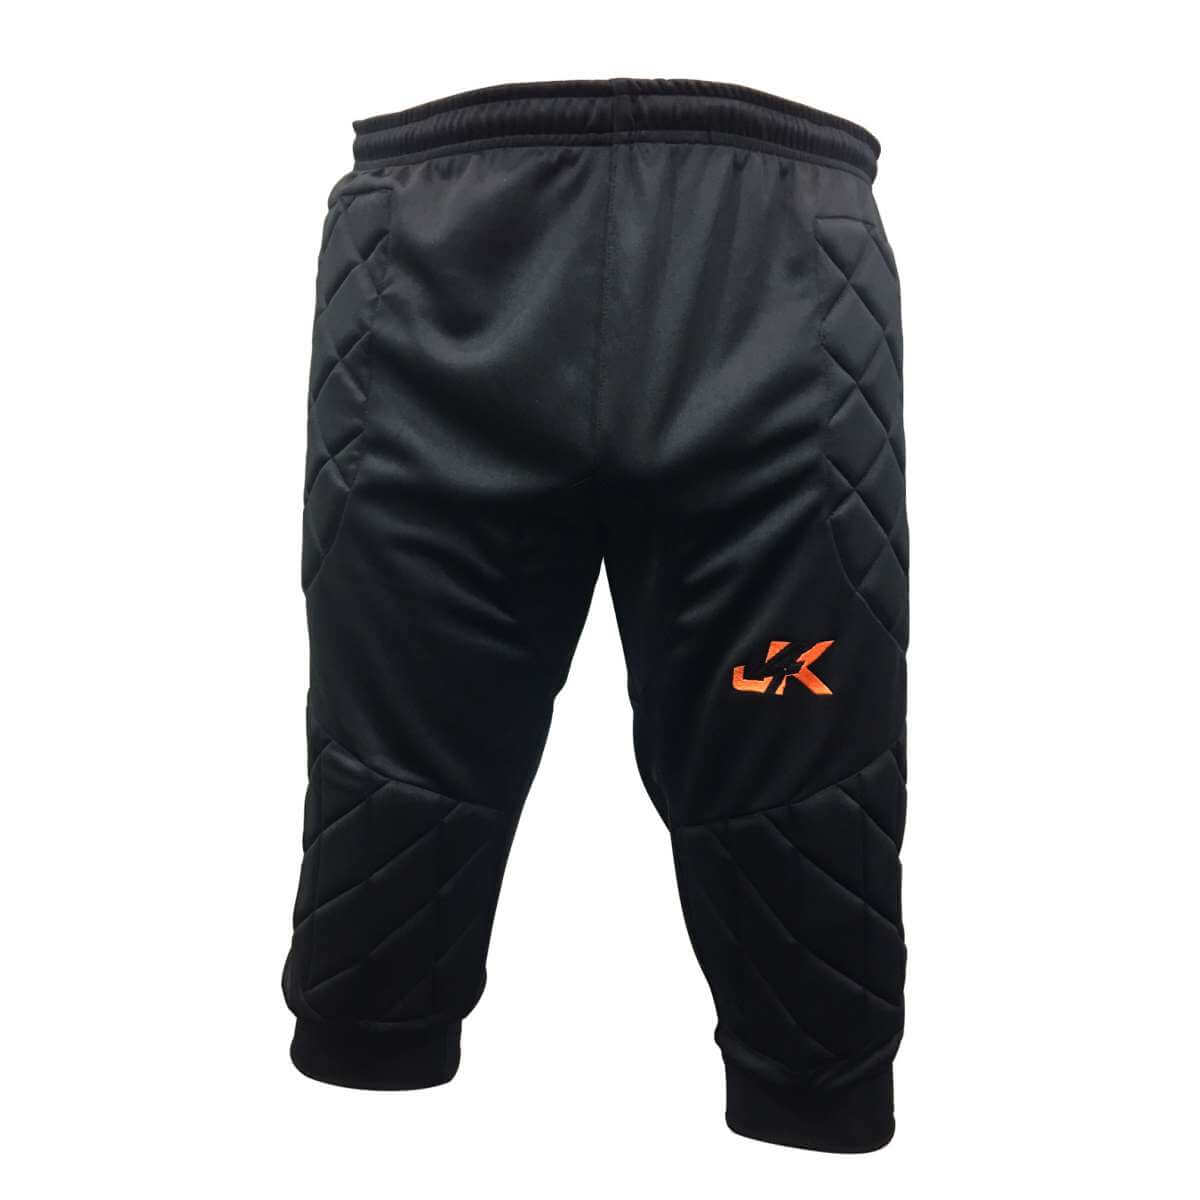 Goalkeeper Pants Padded Goalkeeper Pants For Kids And Adults 